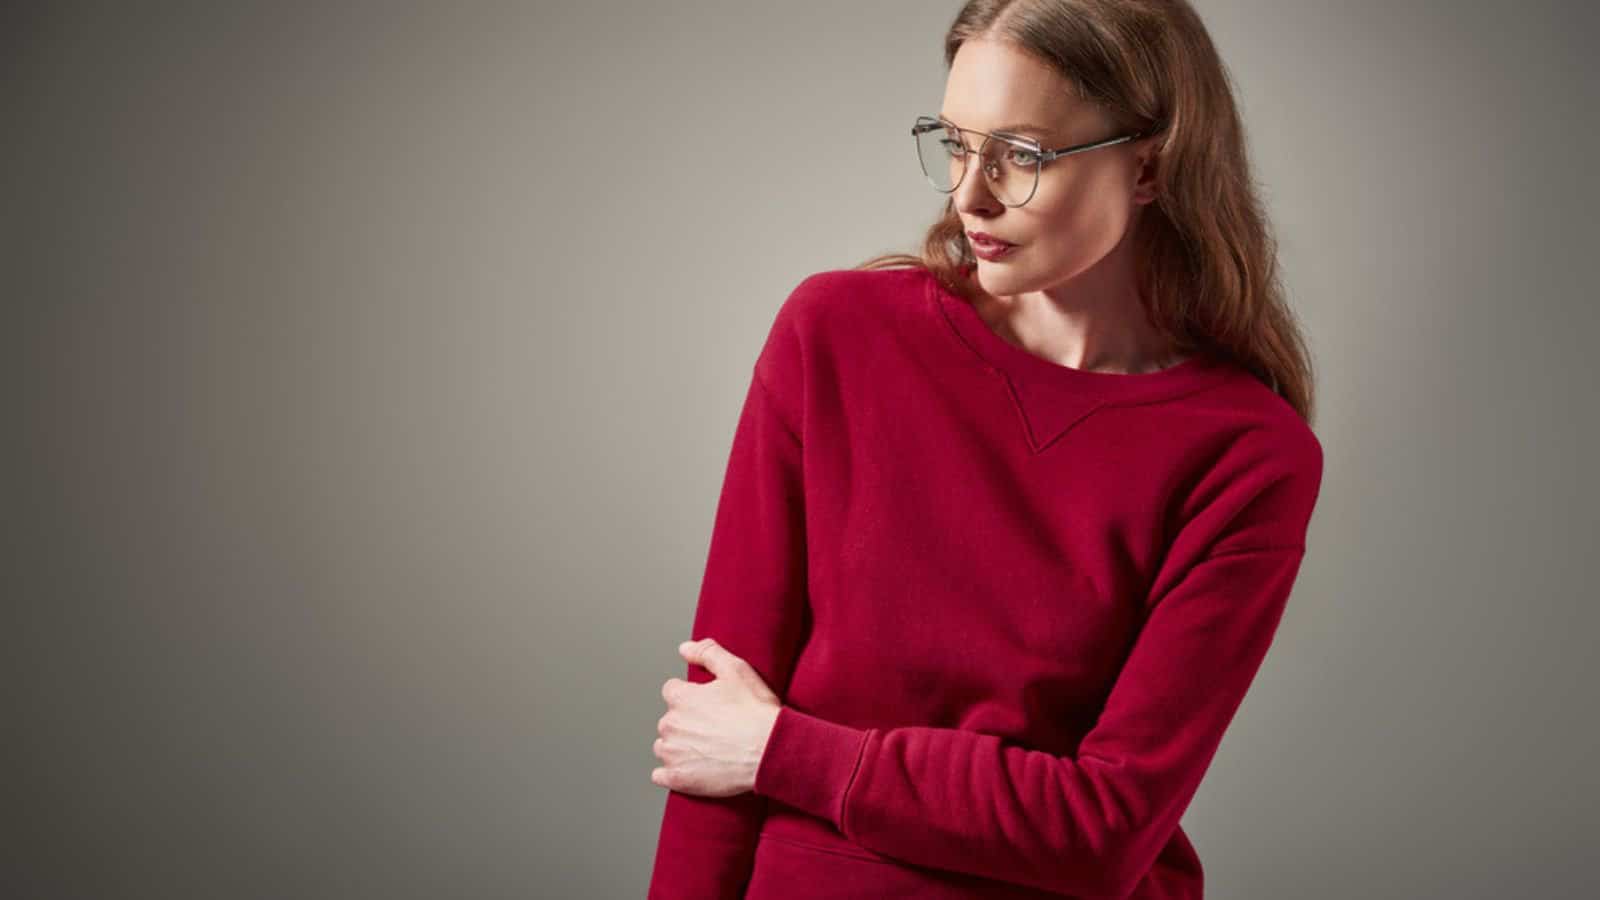 Beautiful woman in stylish outfit and eyeglasses looking away